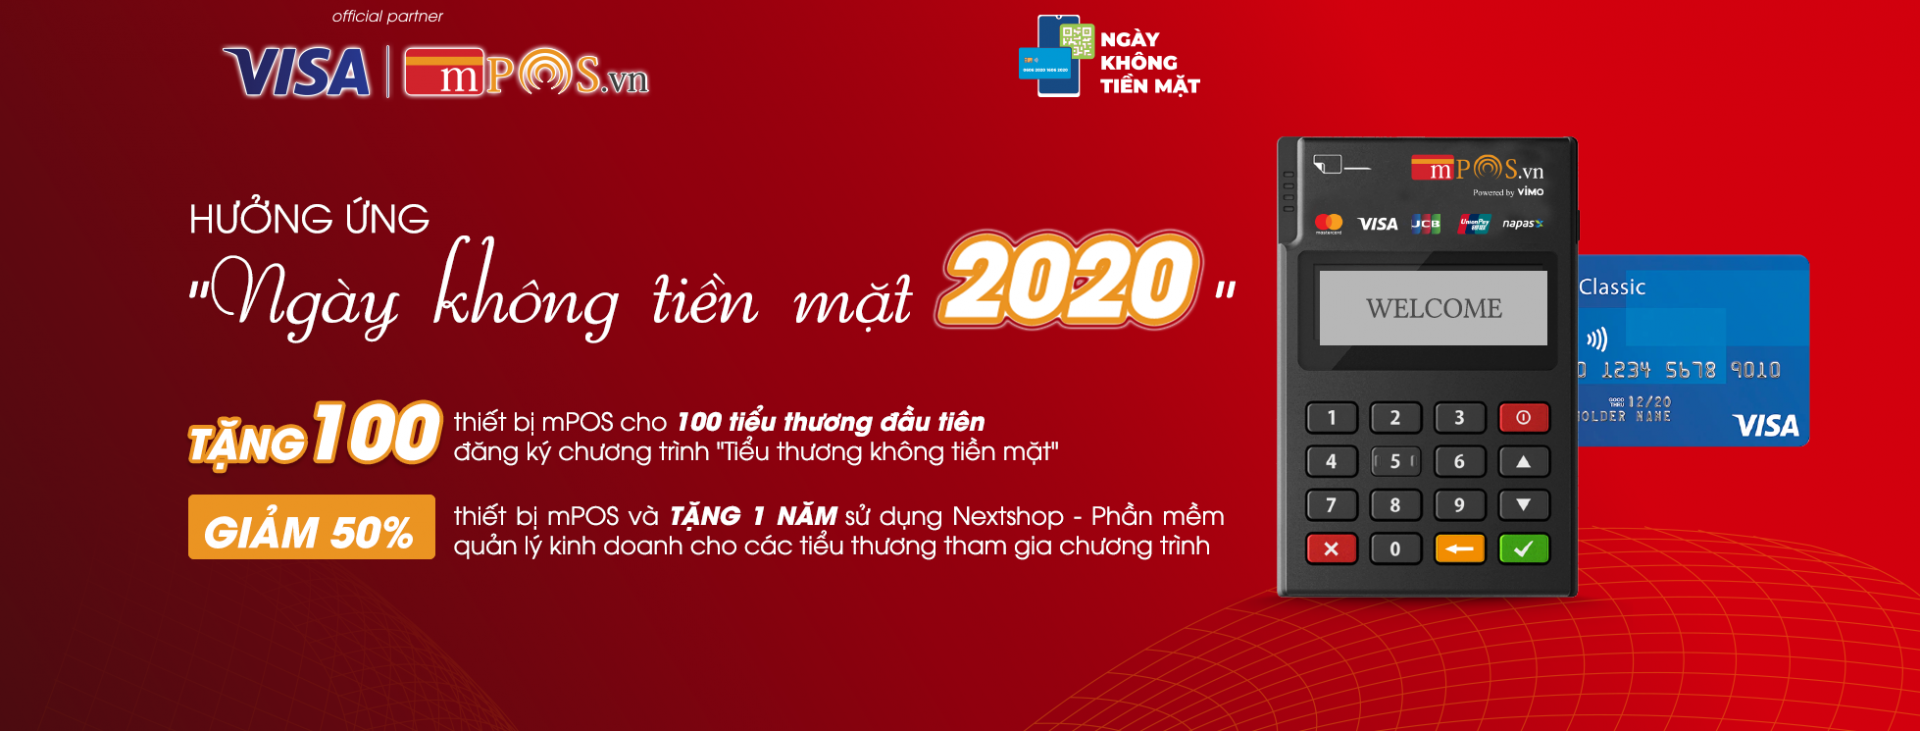 visa supports cashless day in joint effort to promote non cash payments in vietnam